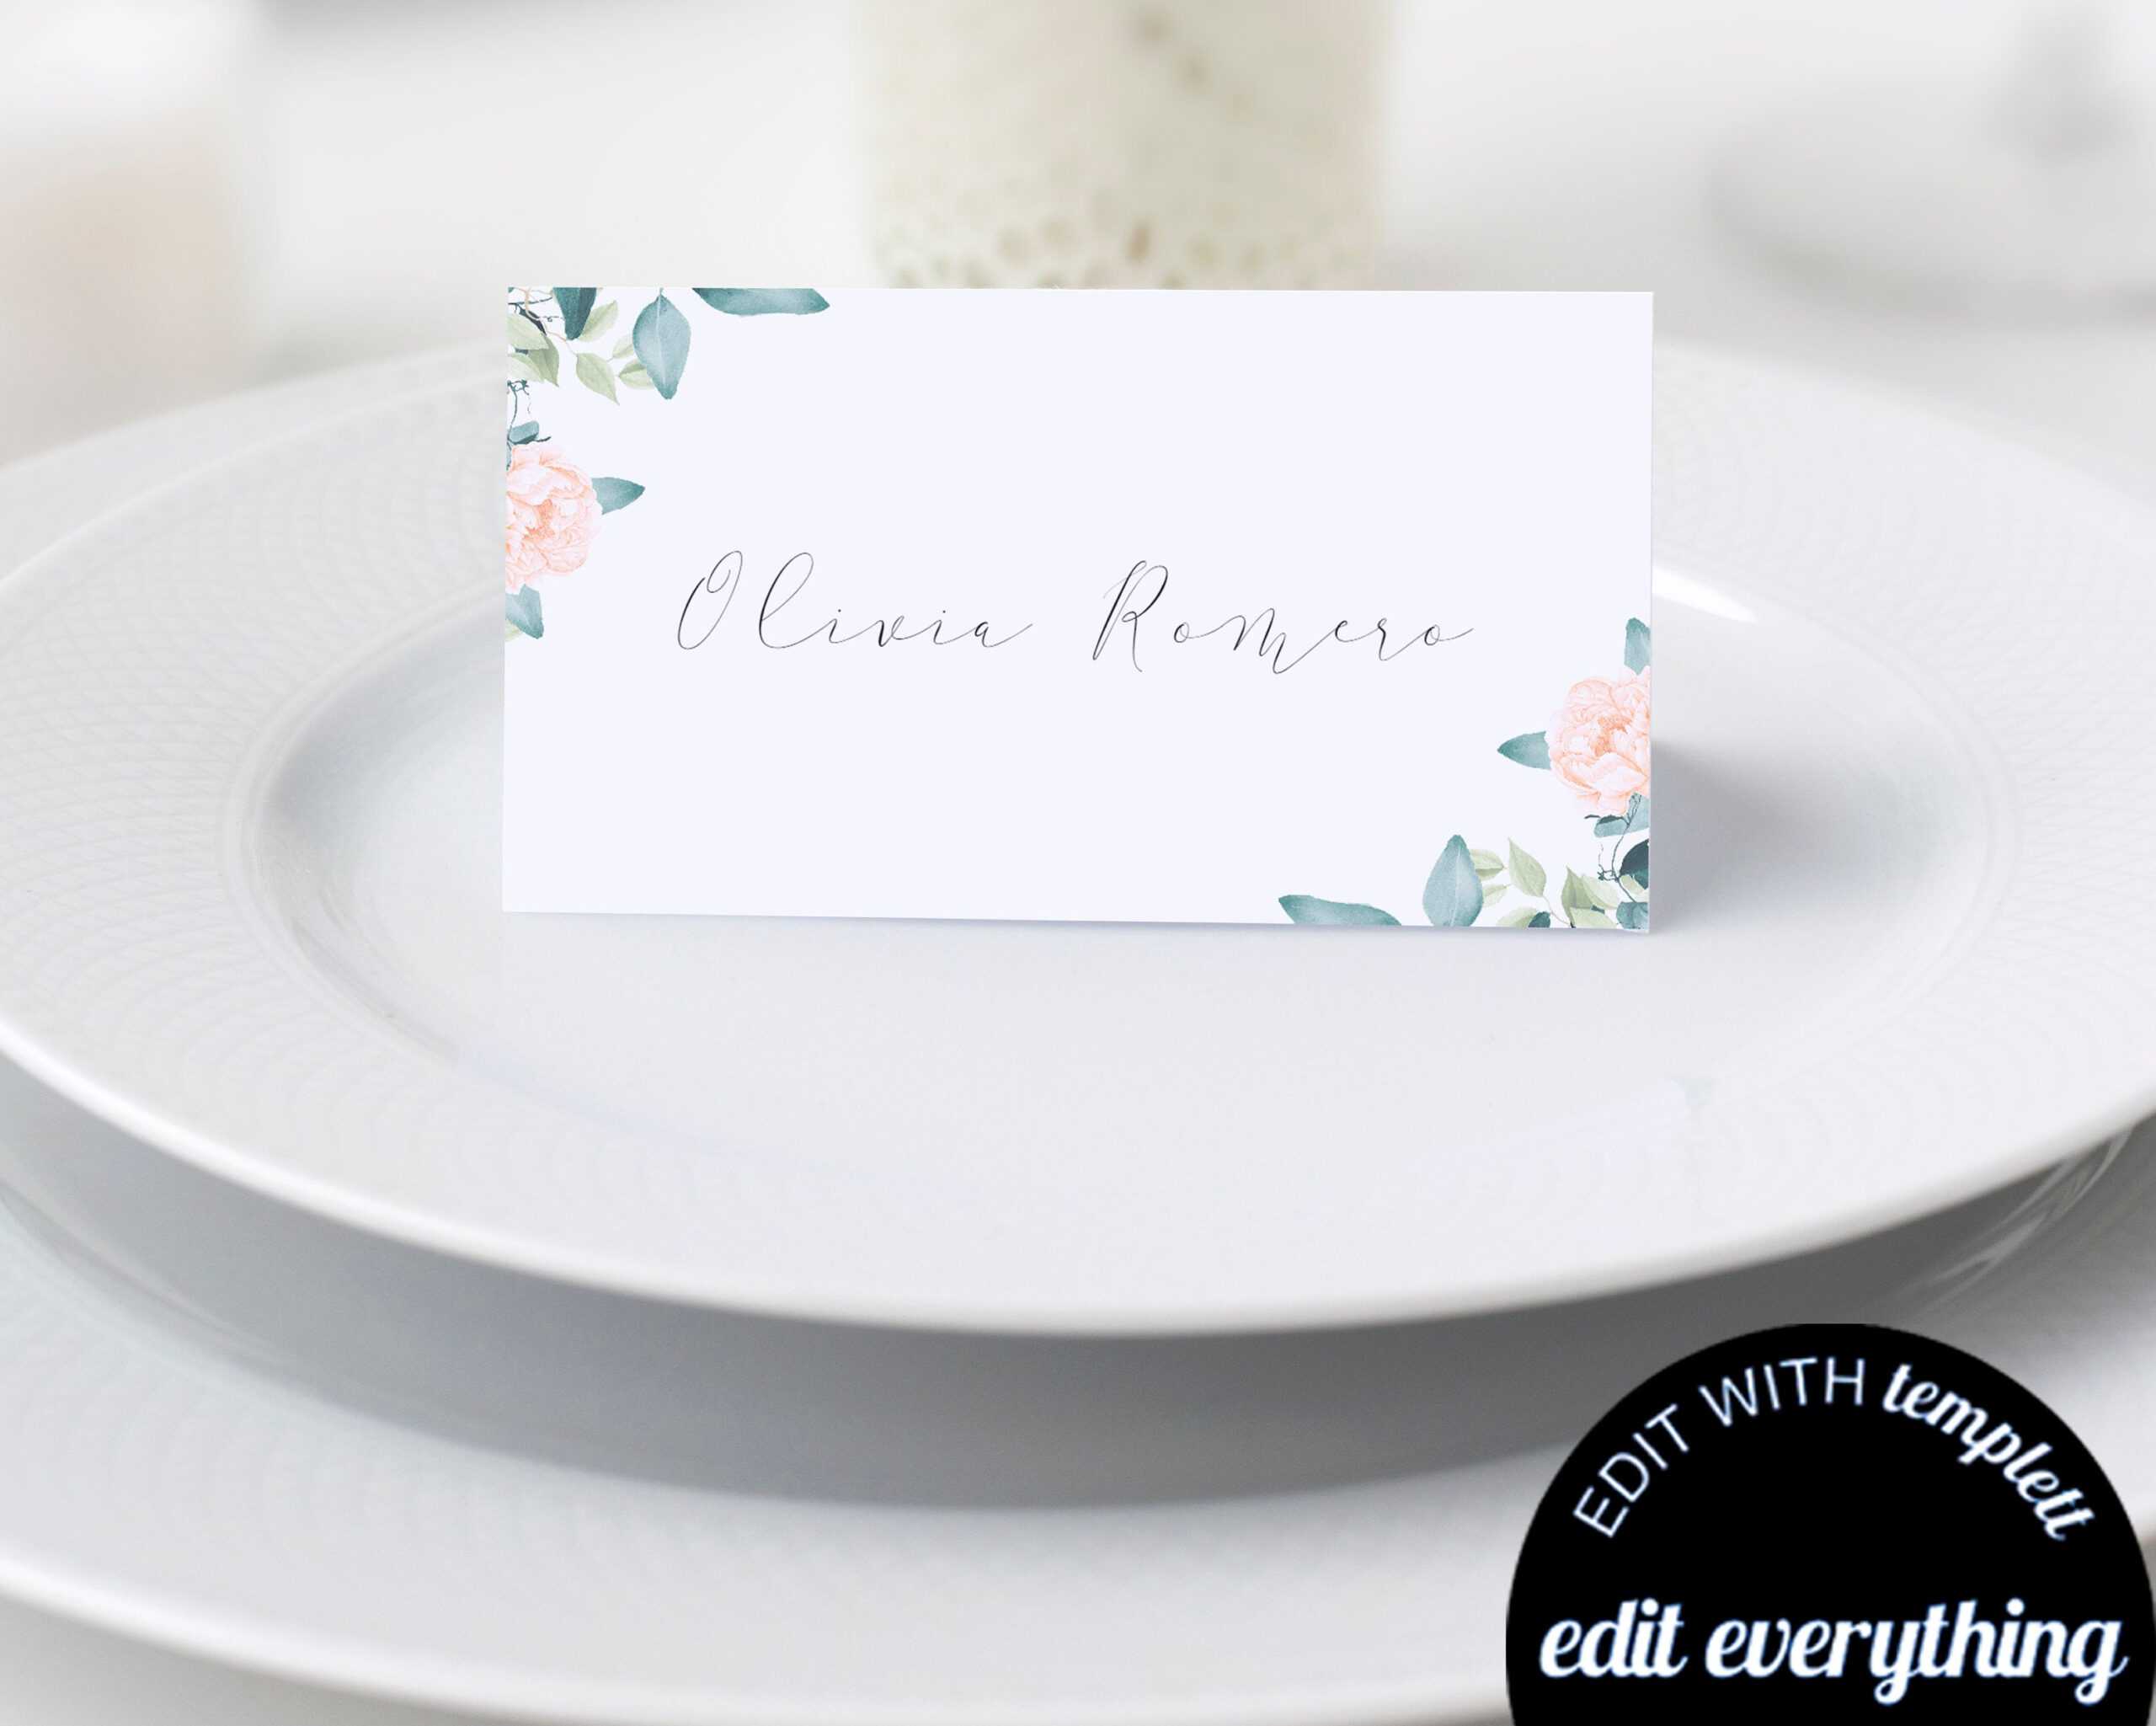 019 Template For Place Cards Il Fullxfull 1542140750 Dg3V Pertaining To Free Place Card Templates 6 Per Page